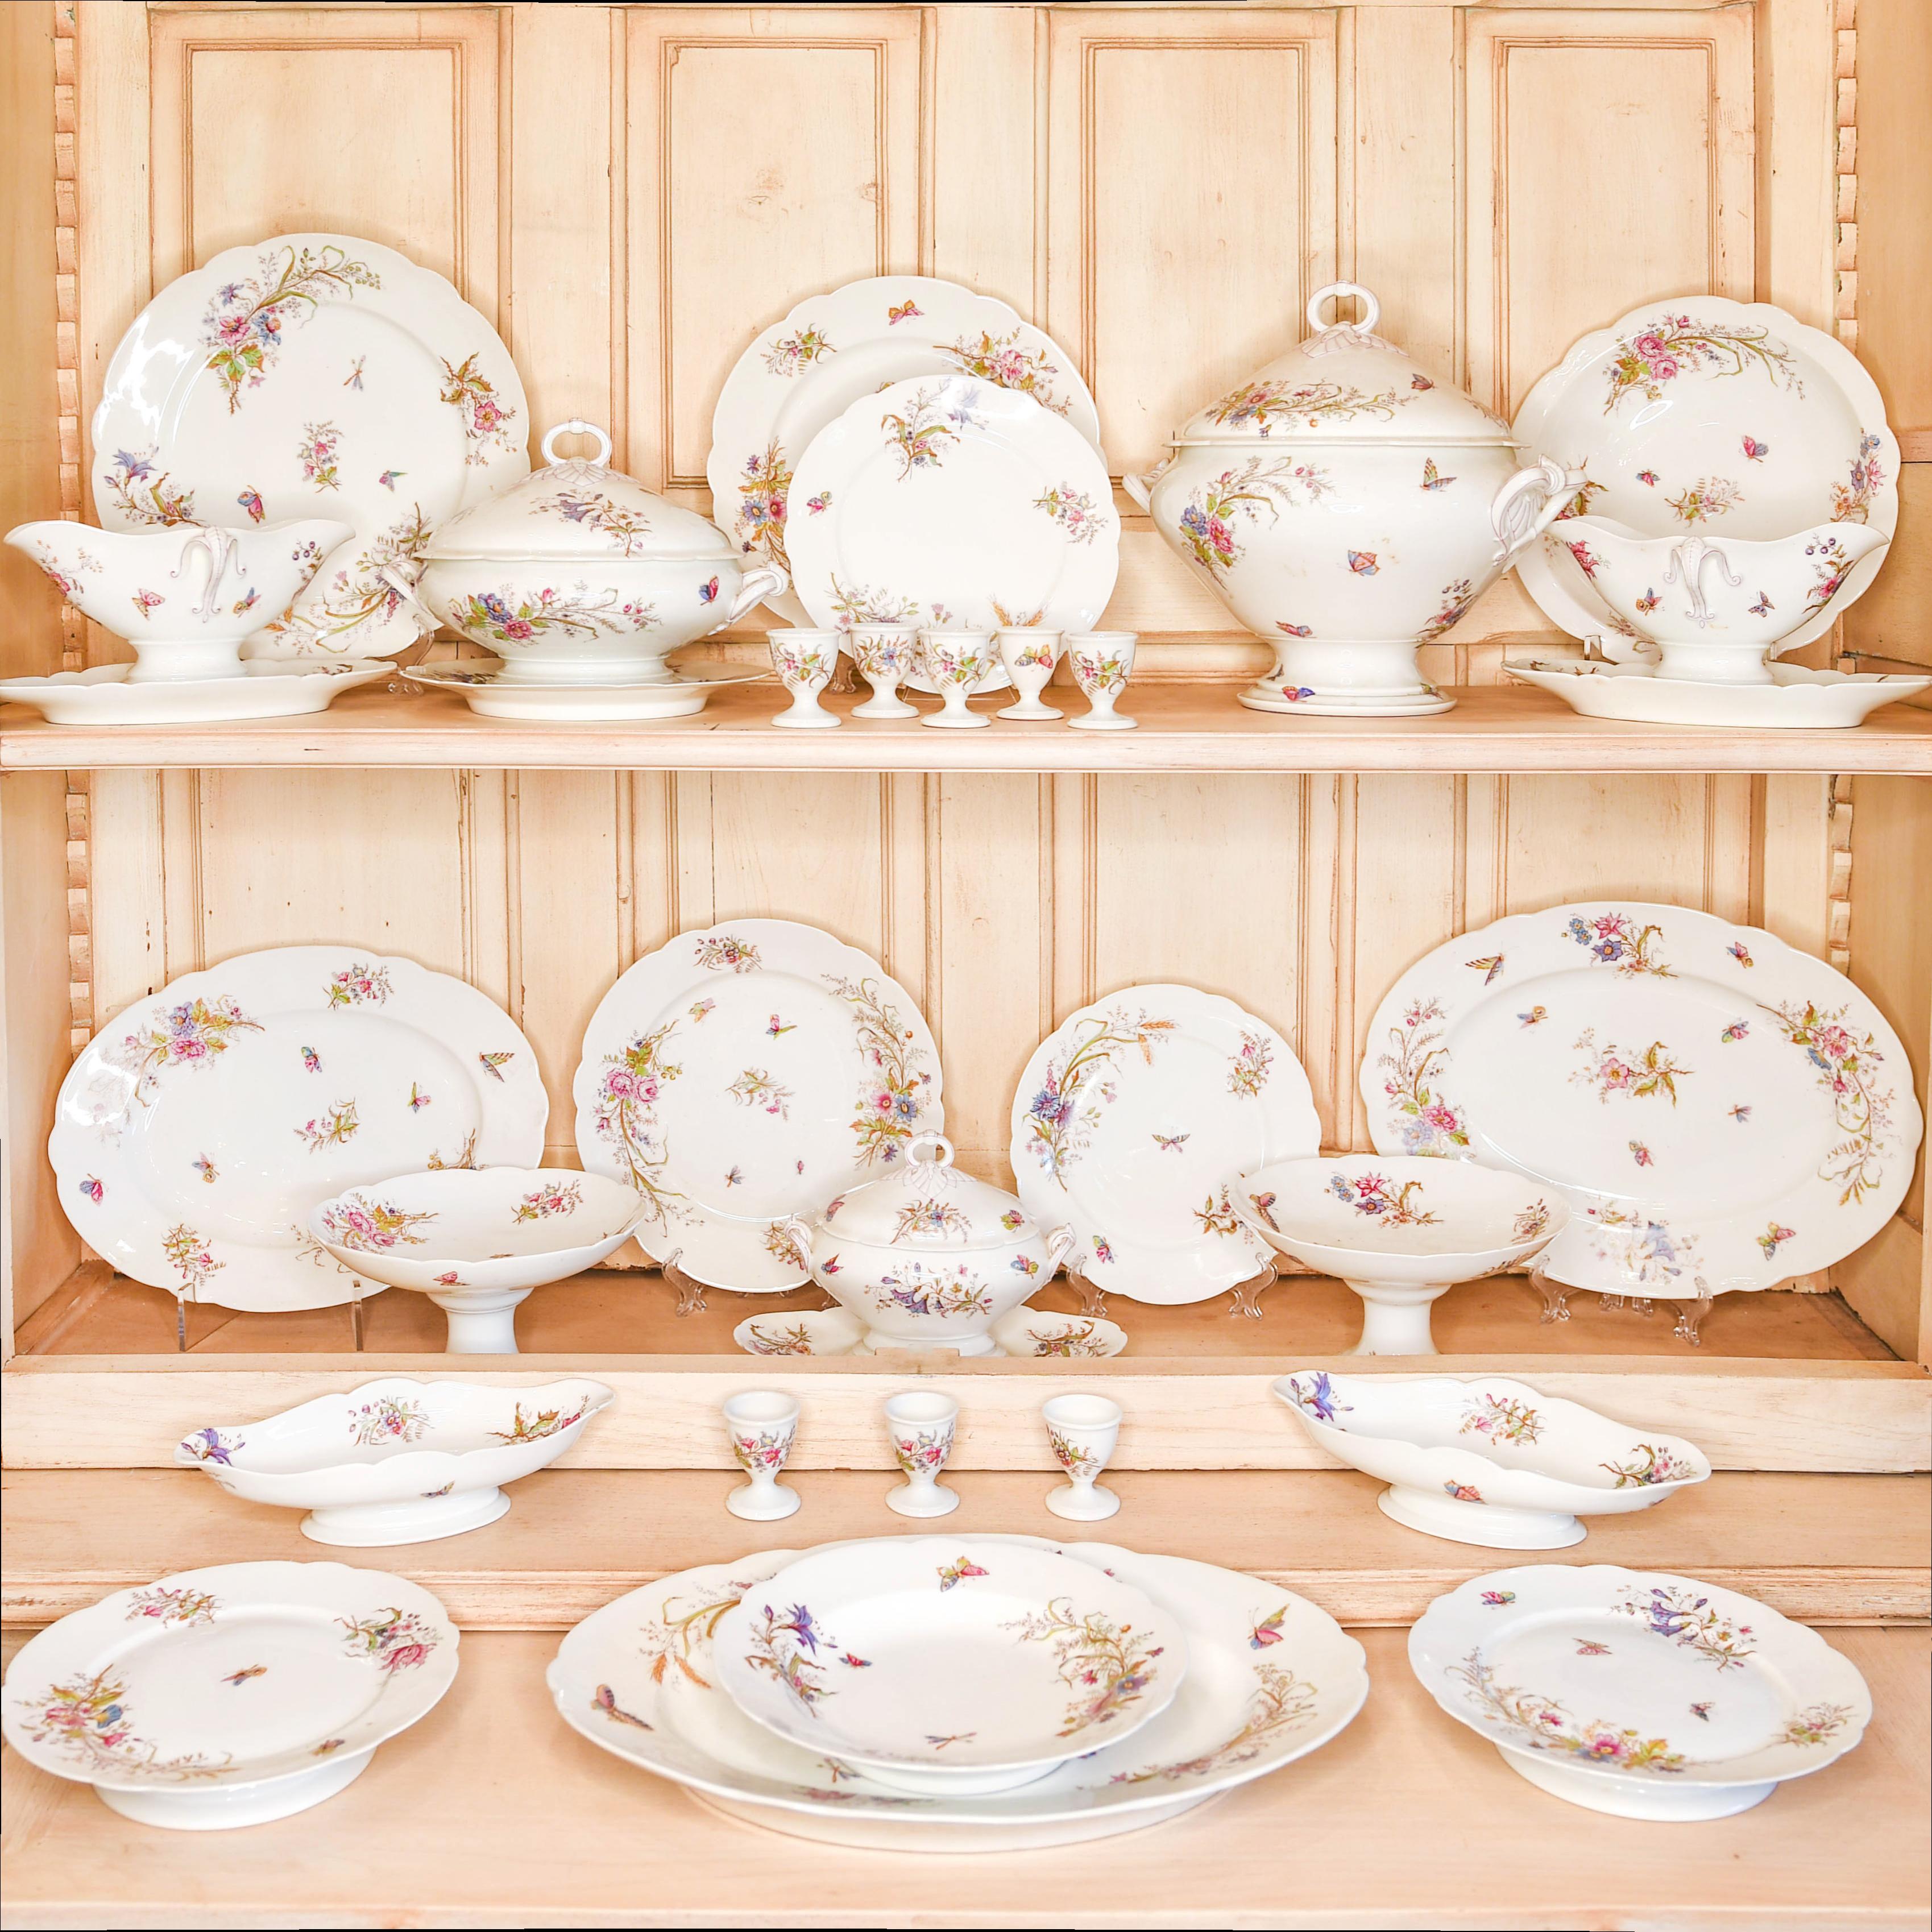 Set consists of: 1 Platter, 38 dinner plates, 8 egg cups, 2 Covered Casseroles, 30 Luncheon Plates, 9 soup bowls, 4 oblong bowls, 2 gravy boats, 1 covered sauce bowl, 2 Pedestal bowls, 4 Pedestal Platters, 3 Oblong Platters, (107